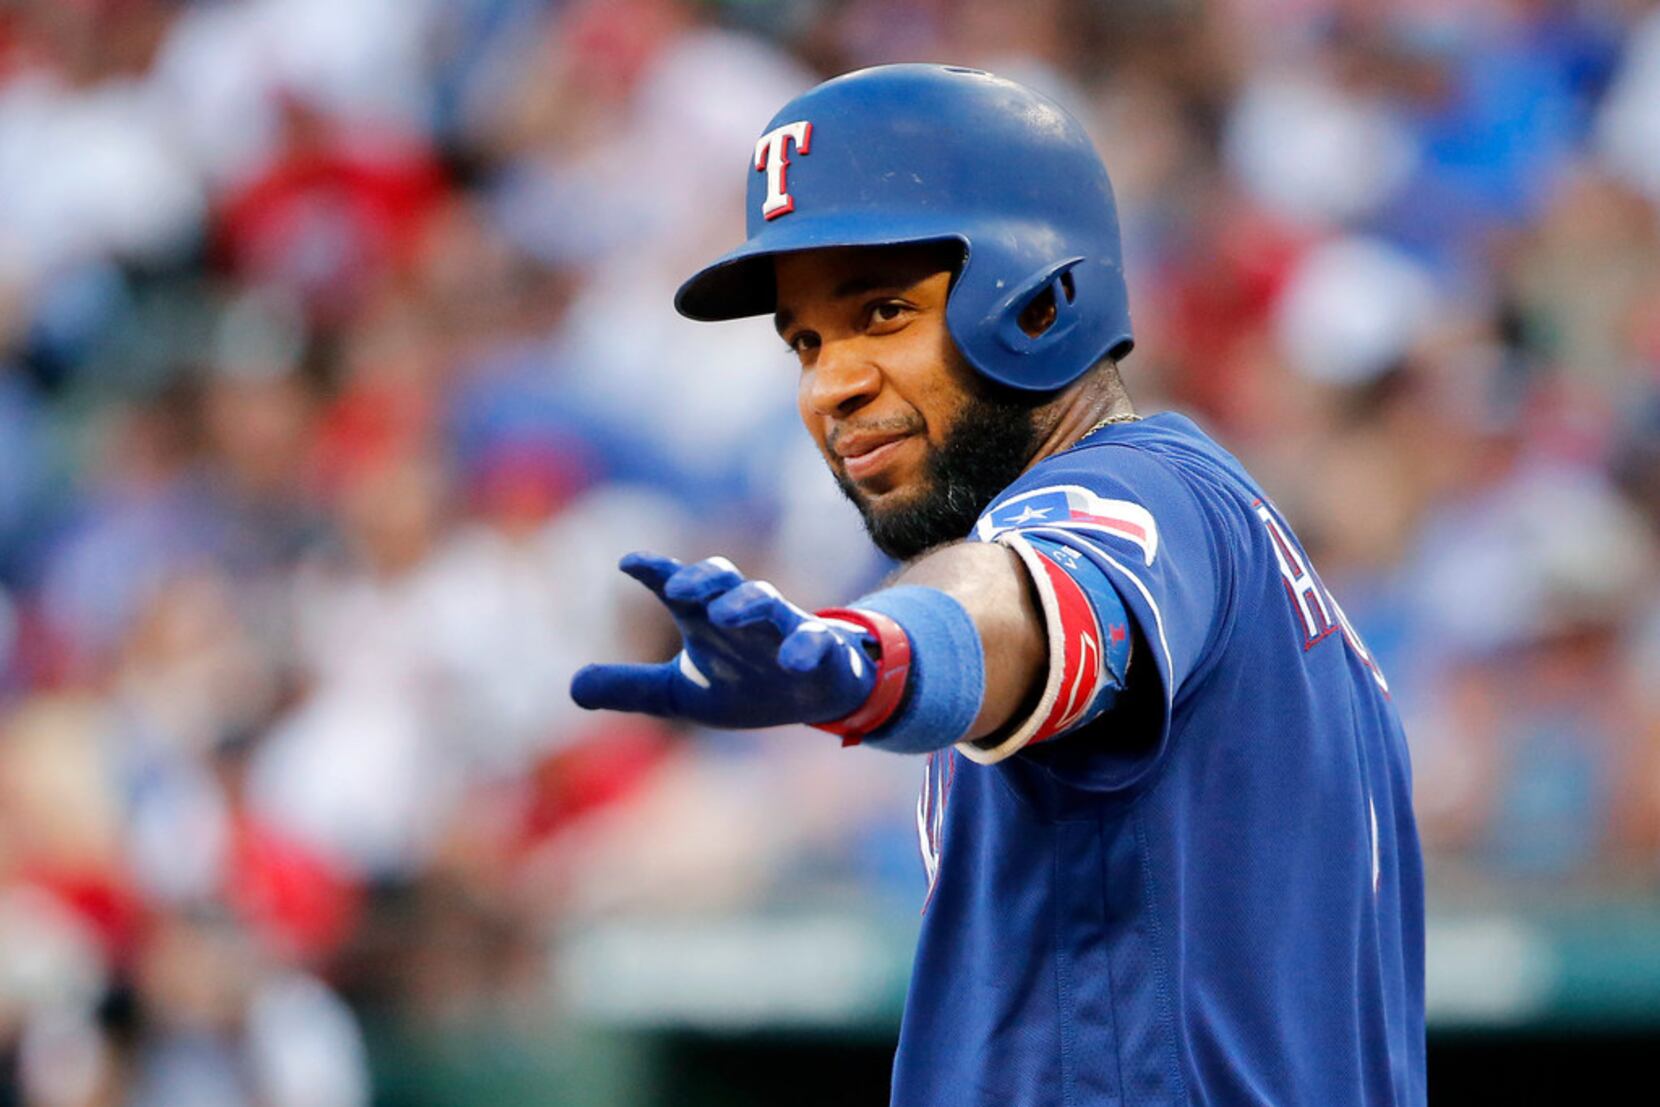 I Want To Win': Isiah Kiner-Falefa Discusses Texas Rangers' Potential  Pursuit Of Free Agent Shortstops - Sports Illustrated Texas Rangers News,  Analysis and More